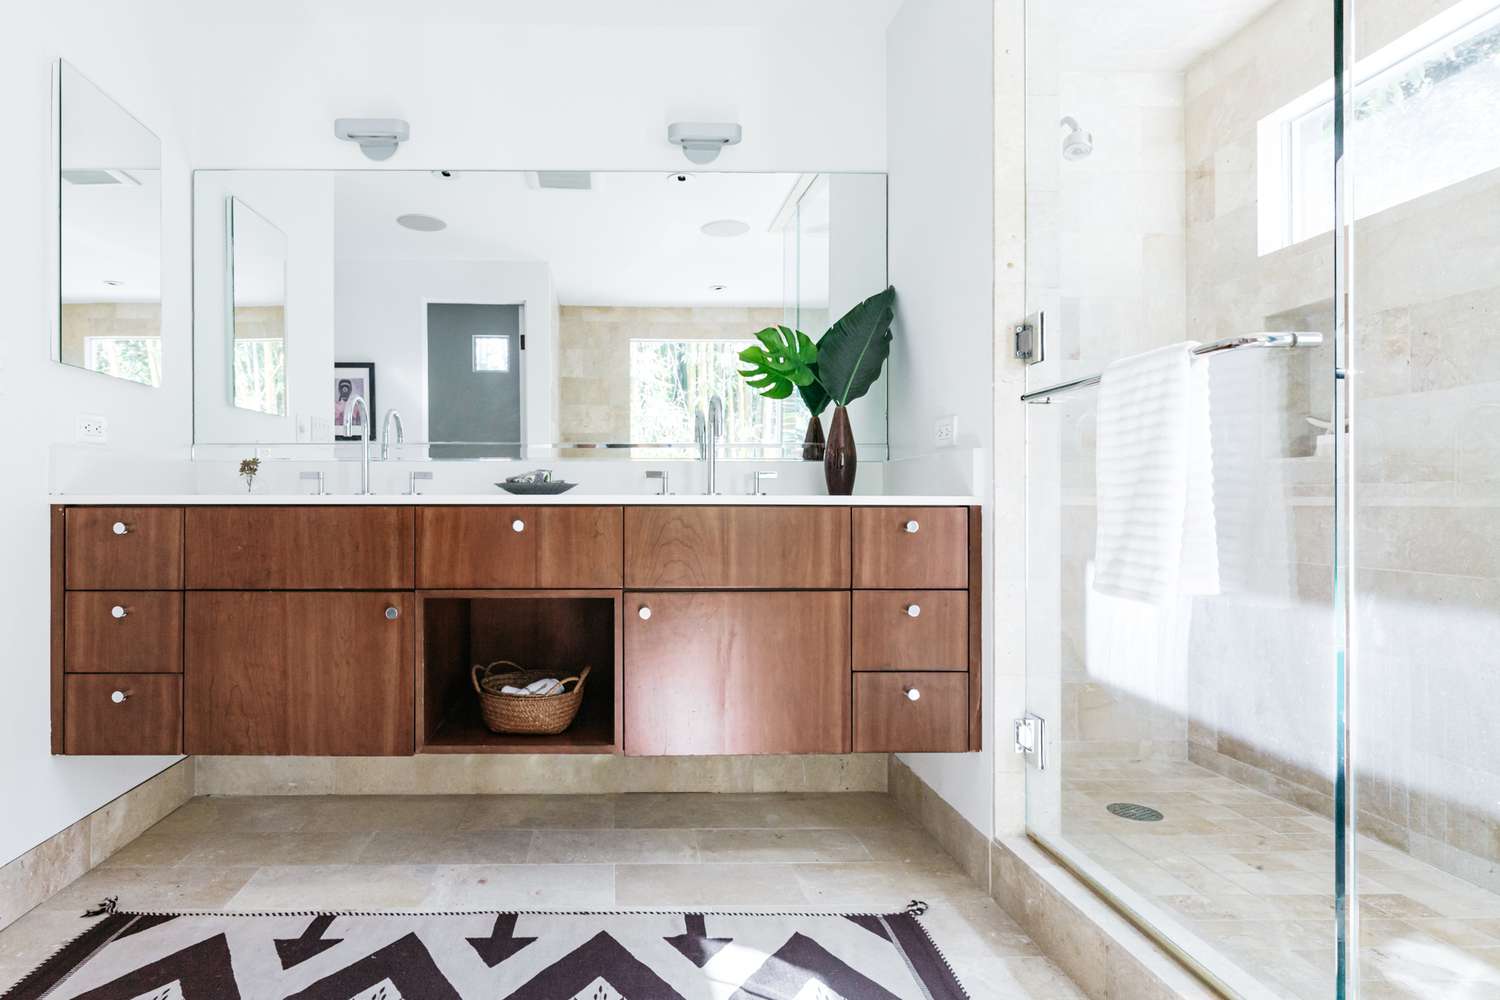 Spa bathroom ideas — 10 ways to turn your bath space into a luxury suite